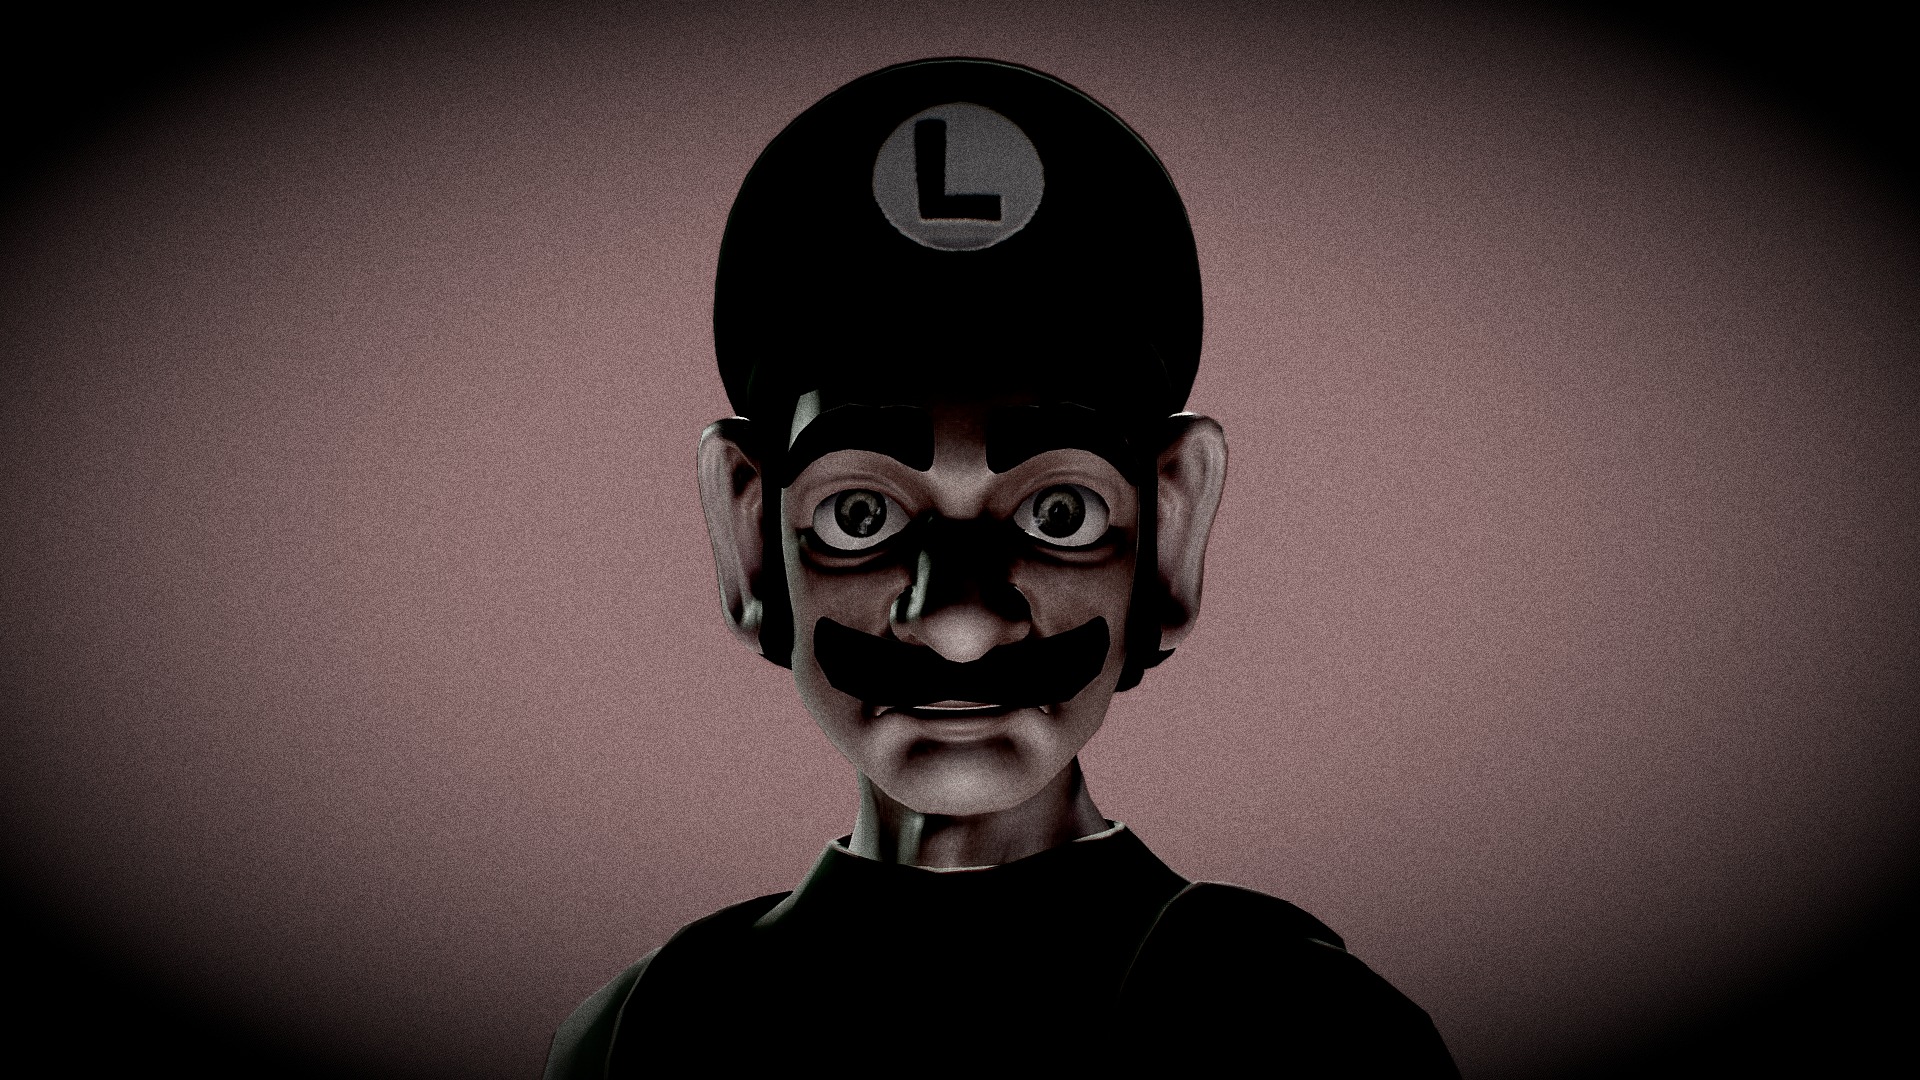 Created with our high school summer camp students. They had some hilarious advice to make Luigi look like a creepy lunatic! I think it was successful.

Thanks to purpleplanetmusic for the creepy background Music. www.purple-planet.com - Luigi's Bad Day - 3D model by Anthony Marquette (@scramchops) 3d model